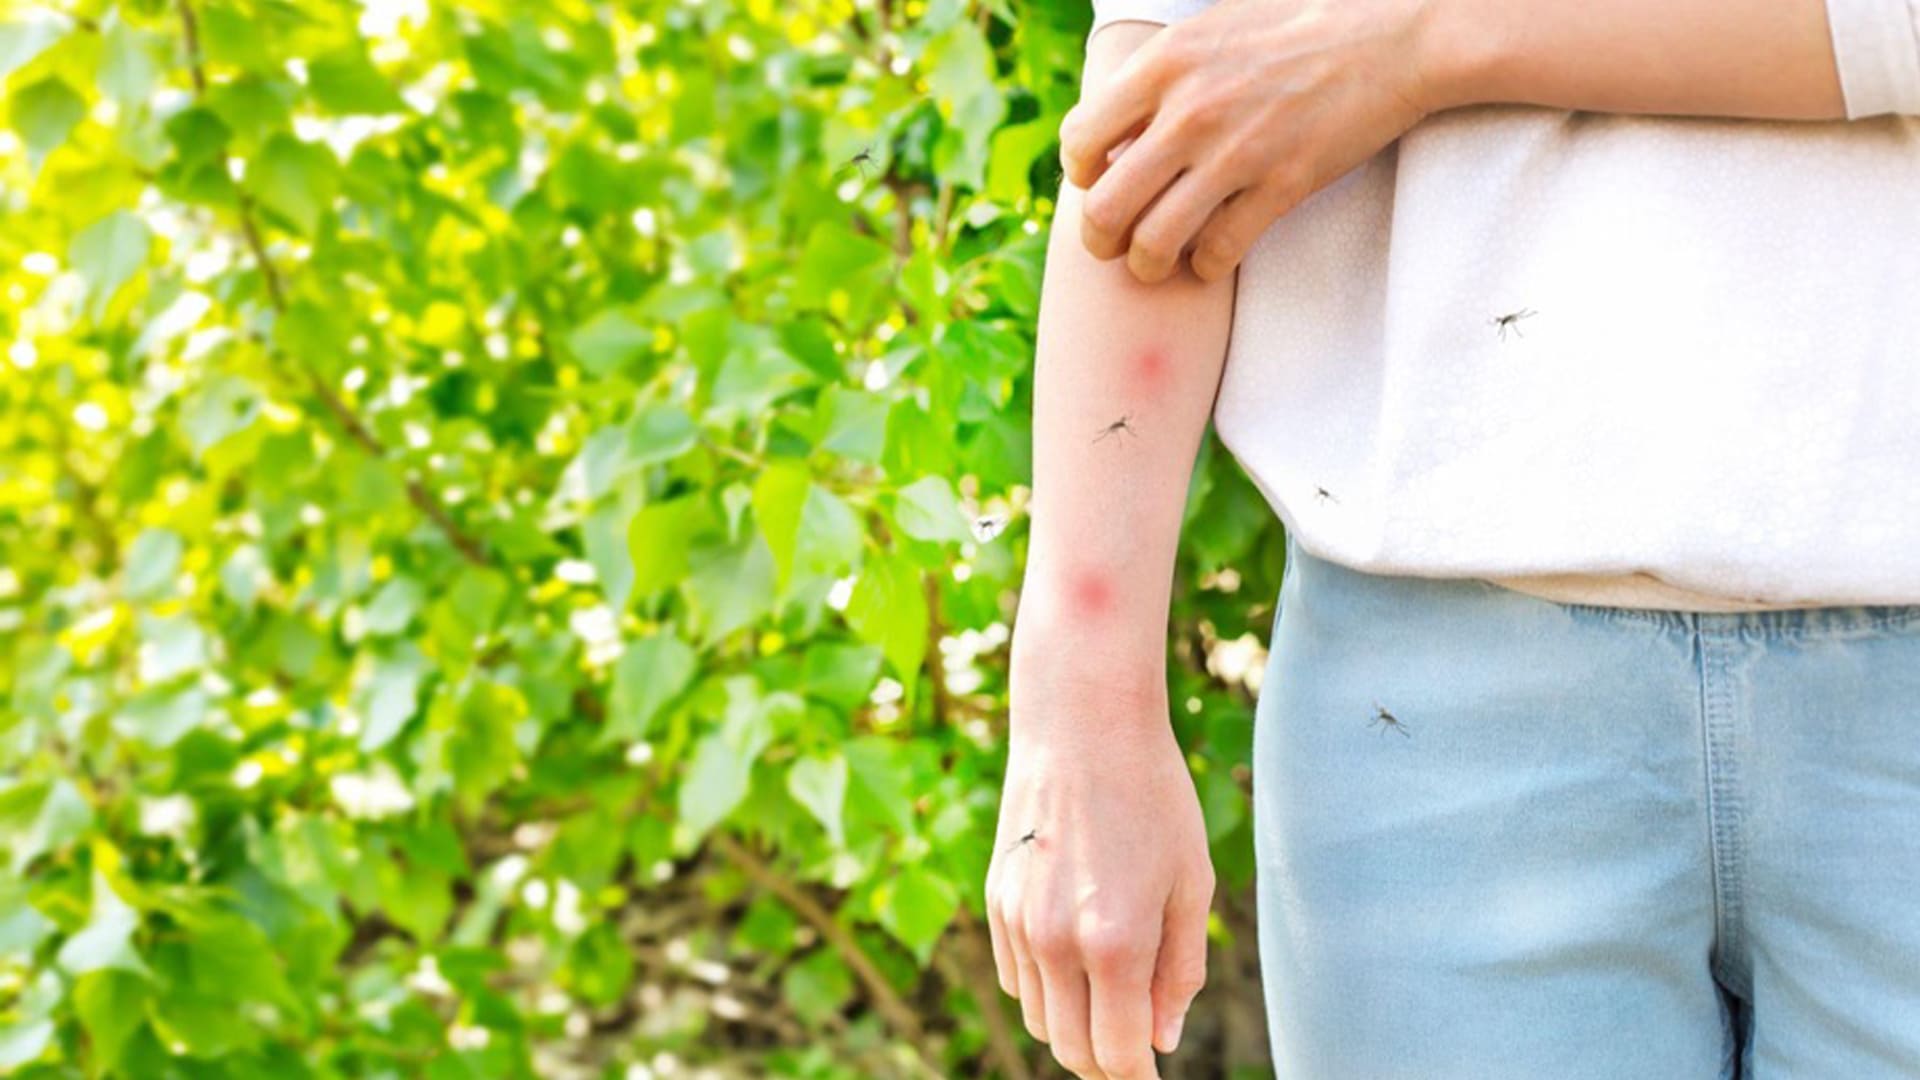 Why Are Mosquito Bites So Itchy?